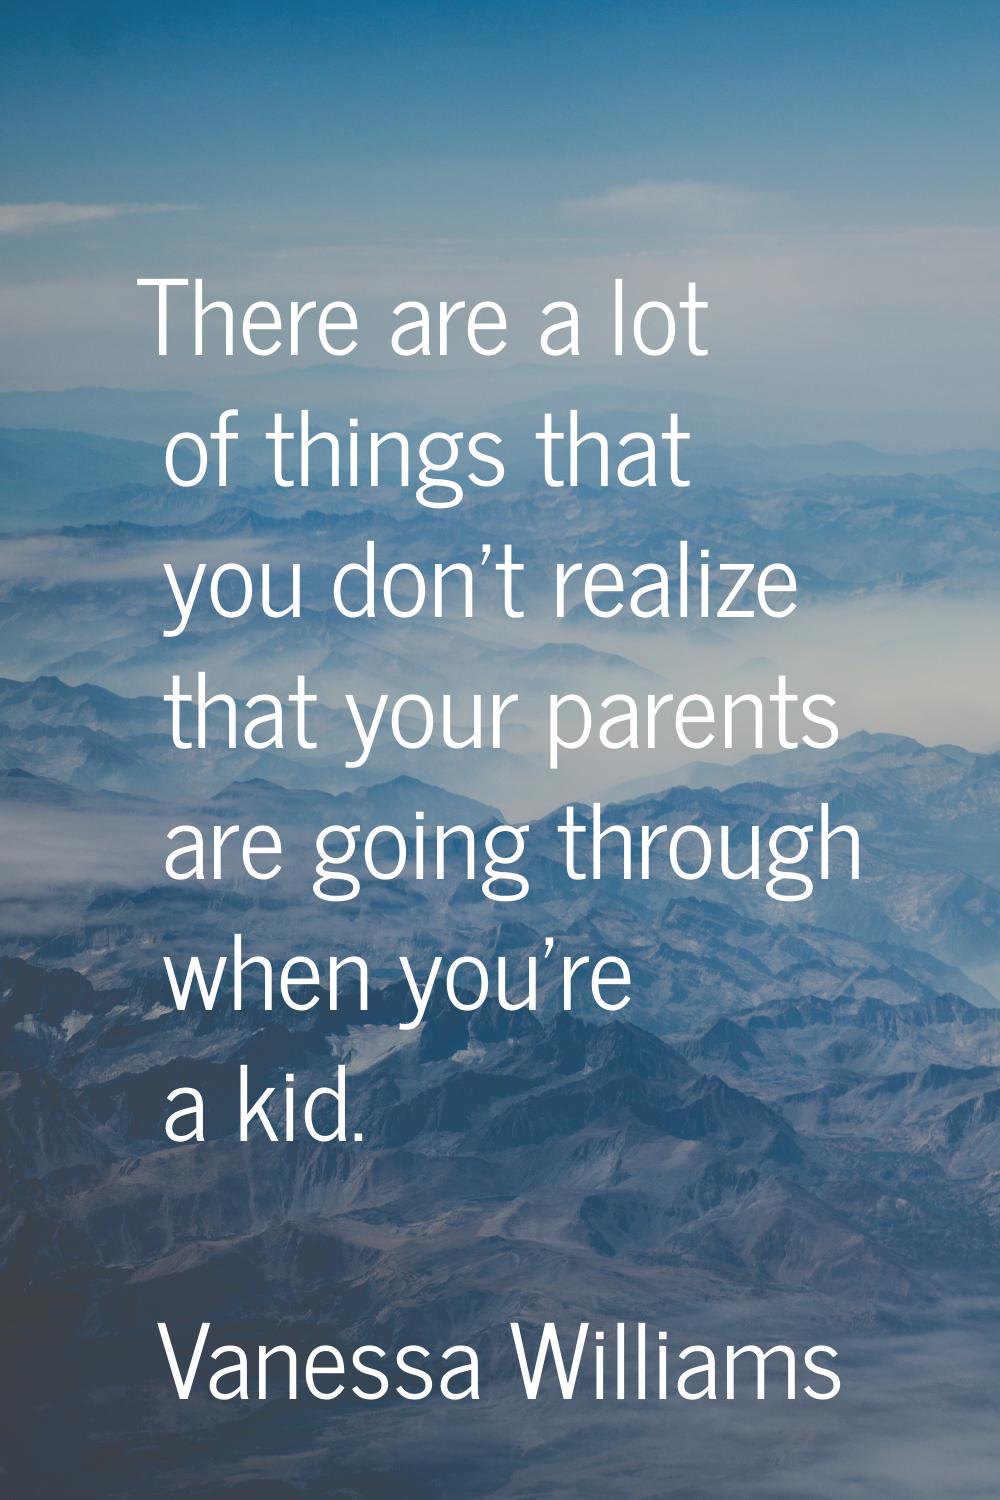 There are a lot of things that you don't realize that your parents are going through when you're a 